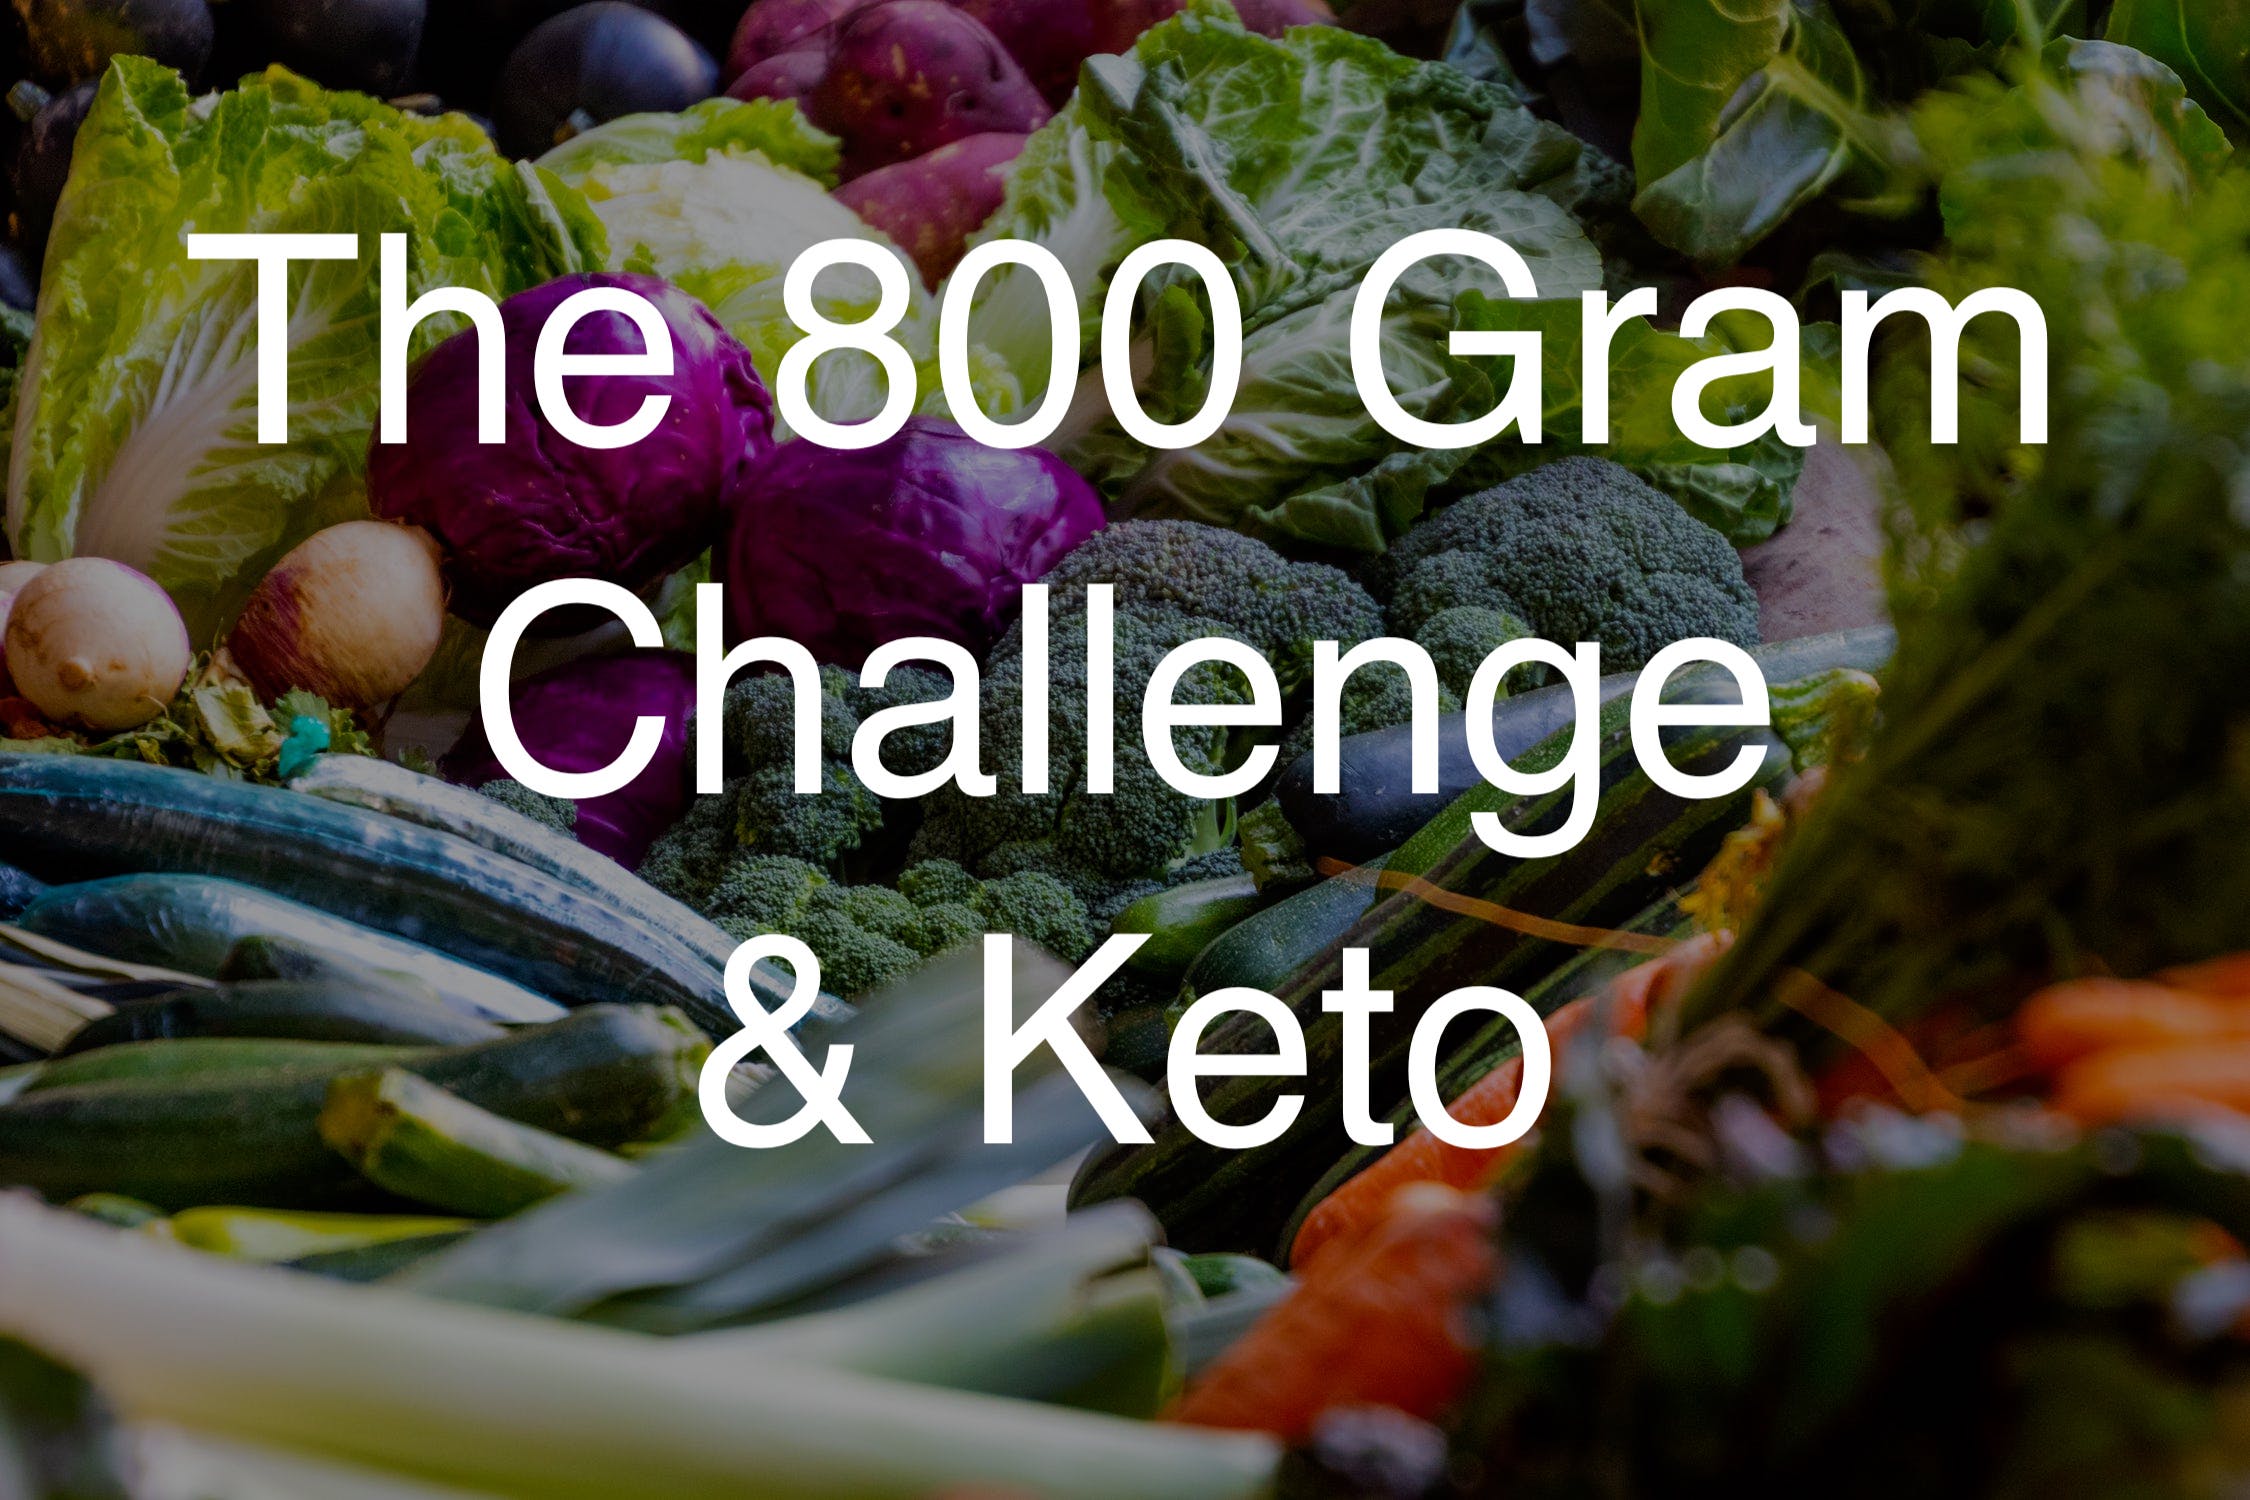 The 800 gram challenge on Keto is tough - getting 800 grams of veggies while keeping low carb! Follow along for tips and recipe ideas